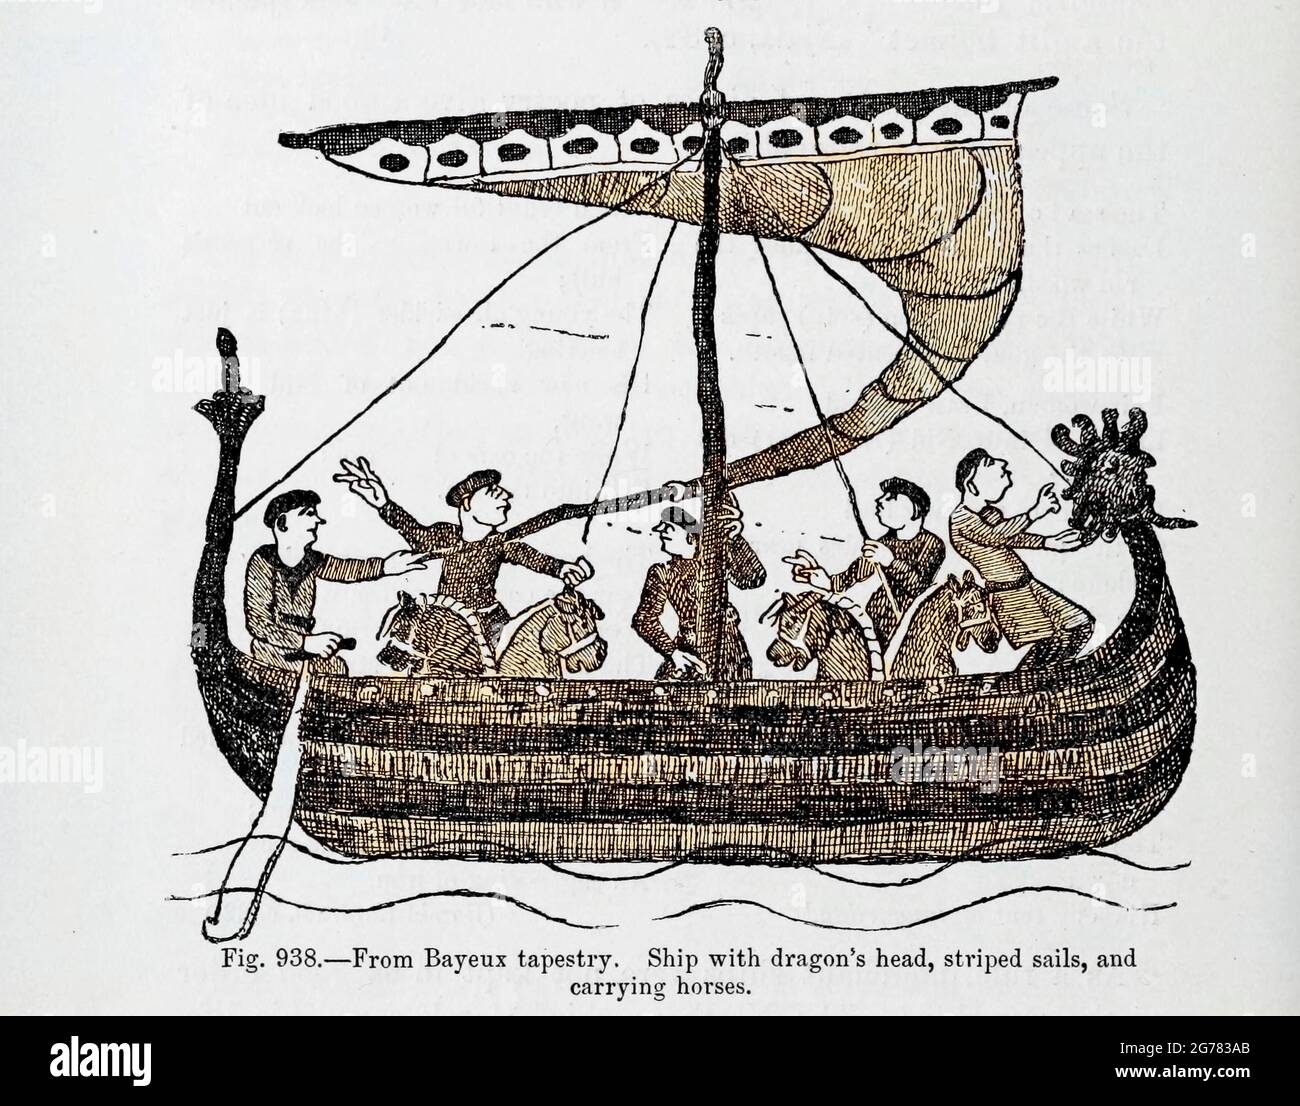 full rigged Viking dragon head ship, lined with shields, striped sails and men pulling on oars. From the book ' The viking age: the early history, manners, and customs of the ancestors of the English-speaking nations ' Volume 2 by Du Chaillu, Paul B. (Paul Belloni), Published in New York by  C. Scribner's sons in 1890 Stock Photo